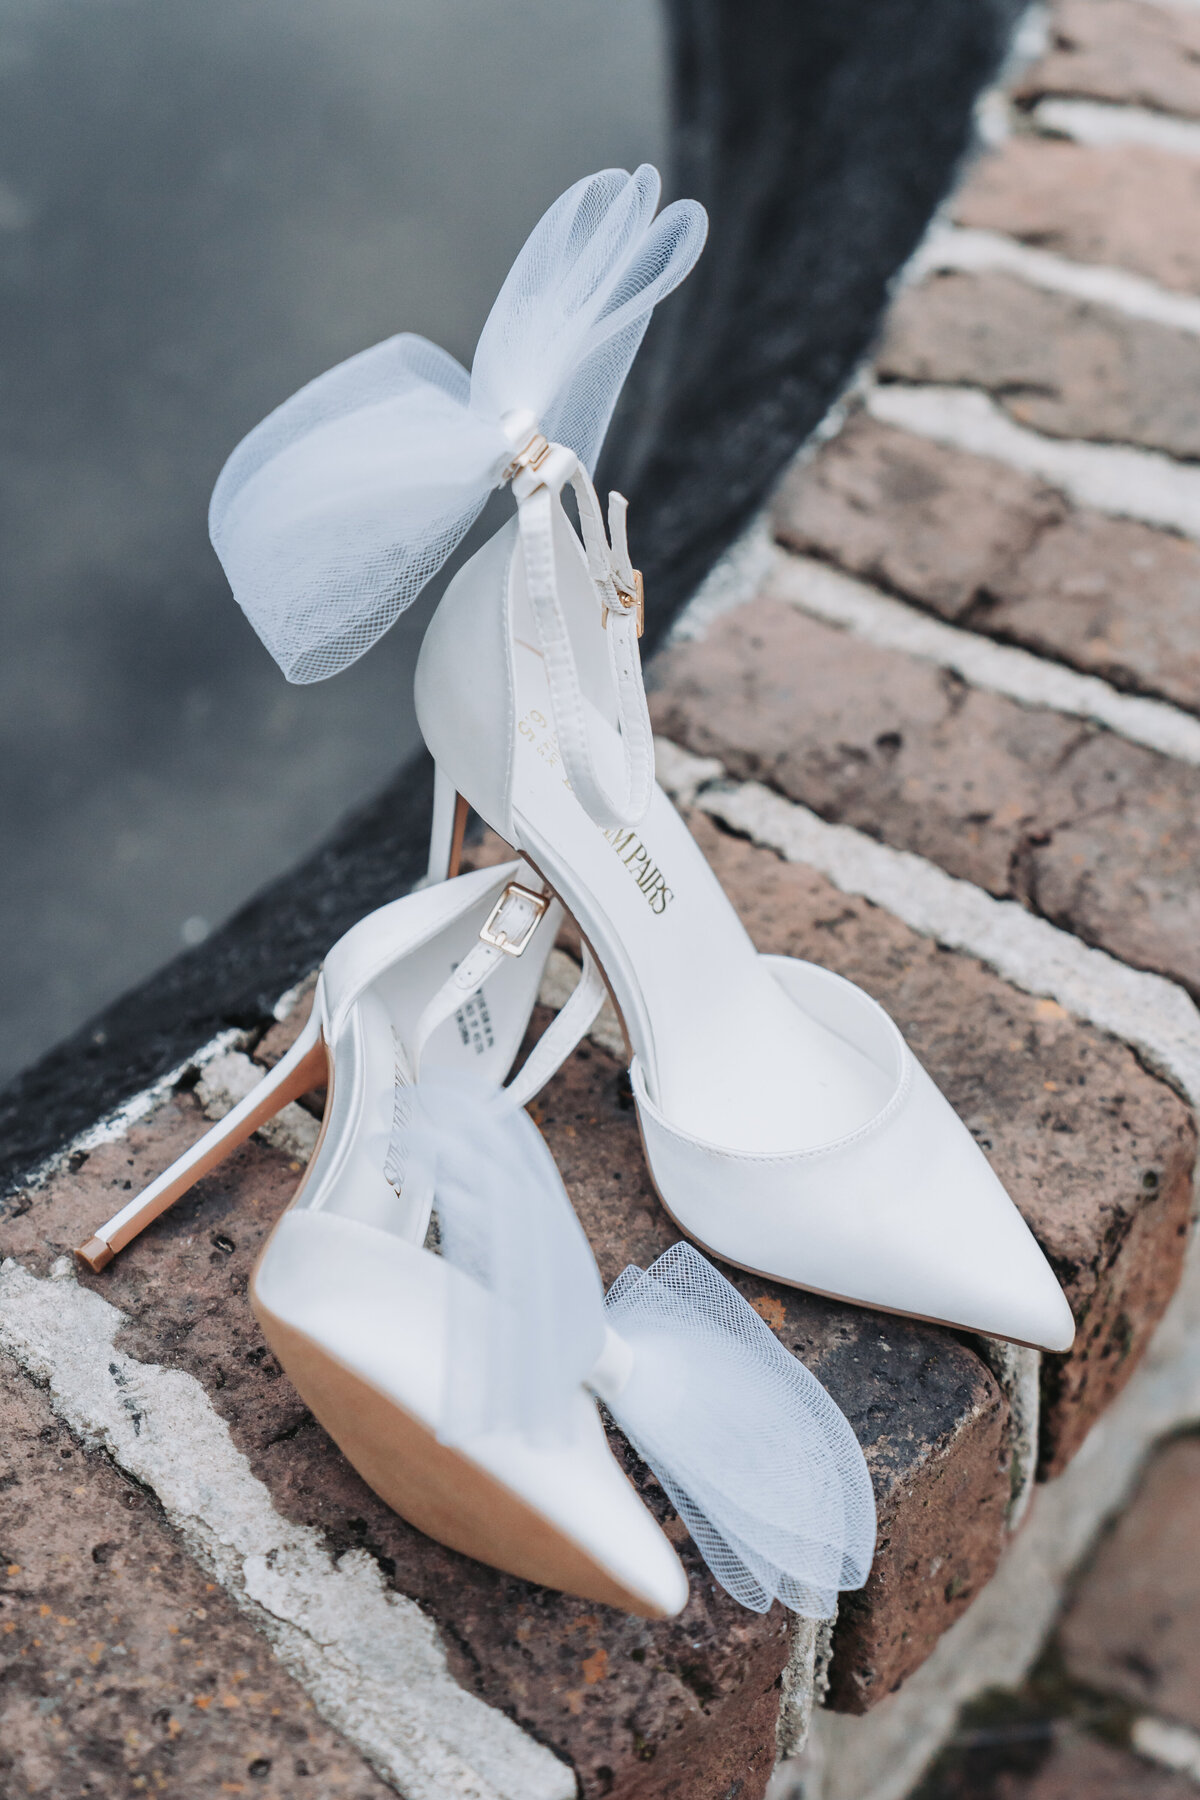 White wedding shoes with a white bow